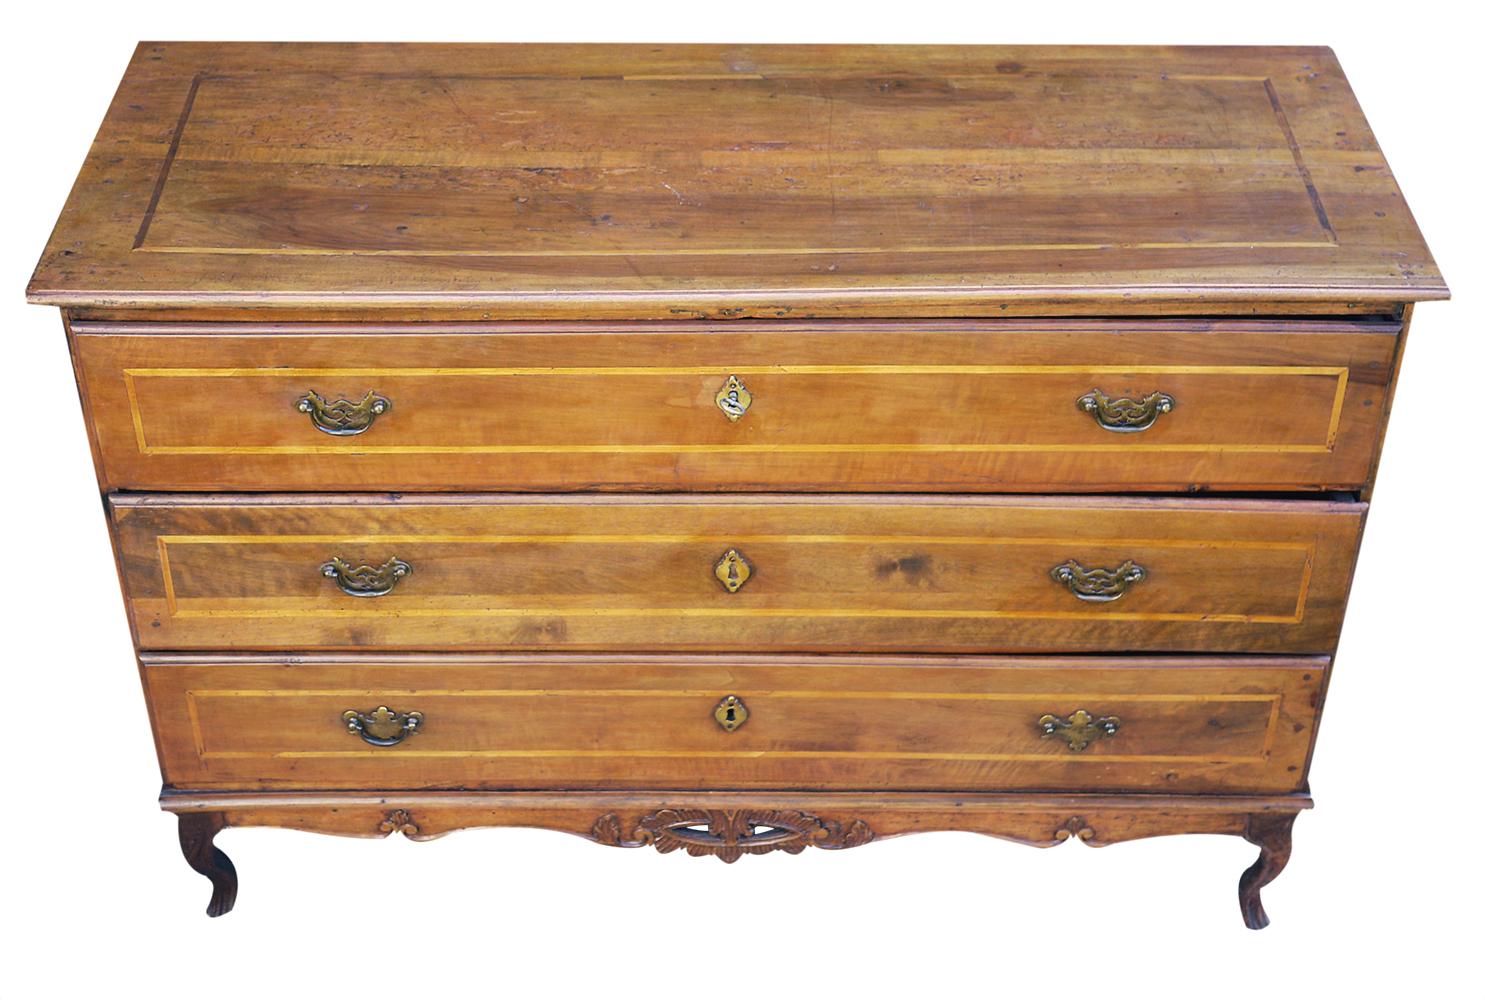 Chest of drawers, with three drawers, in solid walnut, with maple marquetry on top, sides and drawers.
In the lower part three details give lightness and grace to the straight lines of the body and drawers: the cornice, the shaped legs and a refined